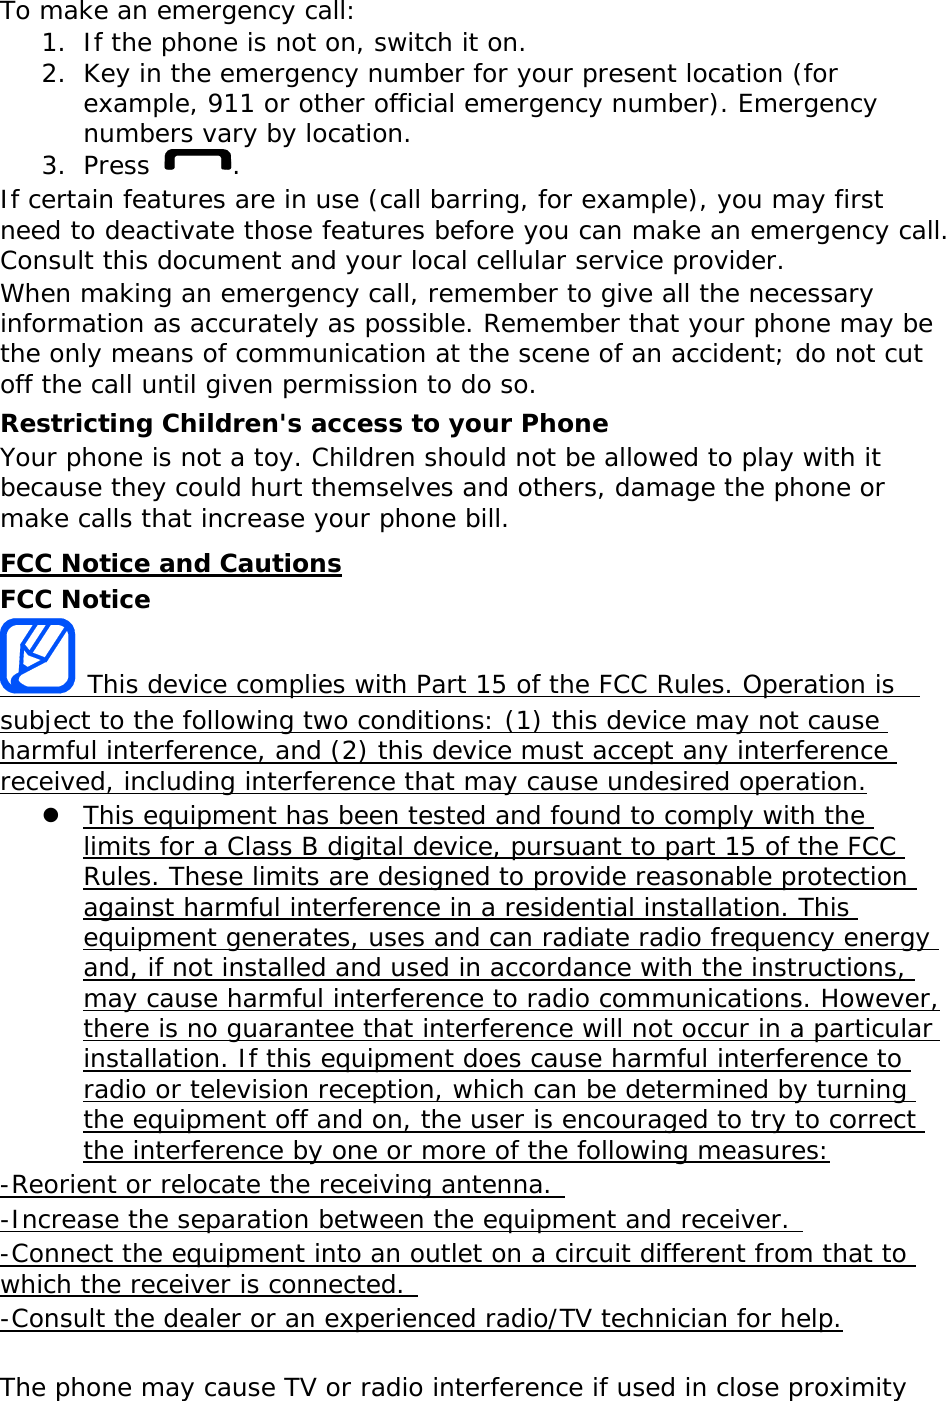 To make an emergency call: 1. If the phone is not on, switch it on. 2. Key in the emergency number for your present location (for example, 911 or other official emergency number). Emergency numbers vary by location. 3. Press  . If certain features are in use (call barring, for example), you may first need to deactivate those features before you can make an emergency call. Consult this document and your local cellular service provider. When making an emergency call, remember to give all the necessary information as accurately as possible. Remember that your phone may be the only means of communication at the scene of an accident; do not cut off the call until given permission to do so. Restricting Children&apos;s access to your Phone Your phone is not a toy. Children should not be allowed to play with it because they could hurt themselves and others, damage the phone or make calls that increase your phone bill. FCC Notice and Cautions FCC Notice  This device complies with Part 15 of the FCC Rules. Operation is  subject to the following two conditions: (1) this device may not cause harmful interference, and (2) this device must accept any interference received, including interference that may cause undesired operation.  This equipment has been tested and found to comply with the limits for a Class B digital device, pursuant to part 15 of the FCC Rules. These limits are designed to provide reasonable protection against harmful interference in a residential installation. This equipment generates, uses and can radiate radio frequency energy and, if not installed and used in accordance with the instructions, may cause harmful interference to radio communications. However, there is no guarantee that interference will not occur in a particular installation. If this equipment does cause harmful interference to radio or television reception, which can be determined by turning the equipment off and on, the user is encouraged to try to correct the interference by one or more of the following measures: -Reorient or relocate the receiving antenna.  -Increase the separation between the equipment and receiver.  -Connect the equipment into an outlet on a circuit different from that to which the receiver is connected.  -Consult the dealer or an experienced radio/TV technician for help.  The phone may cause TV or radio interference if used in close proximity 